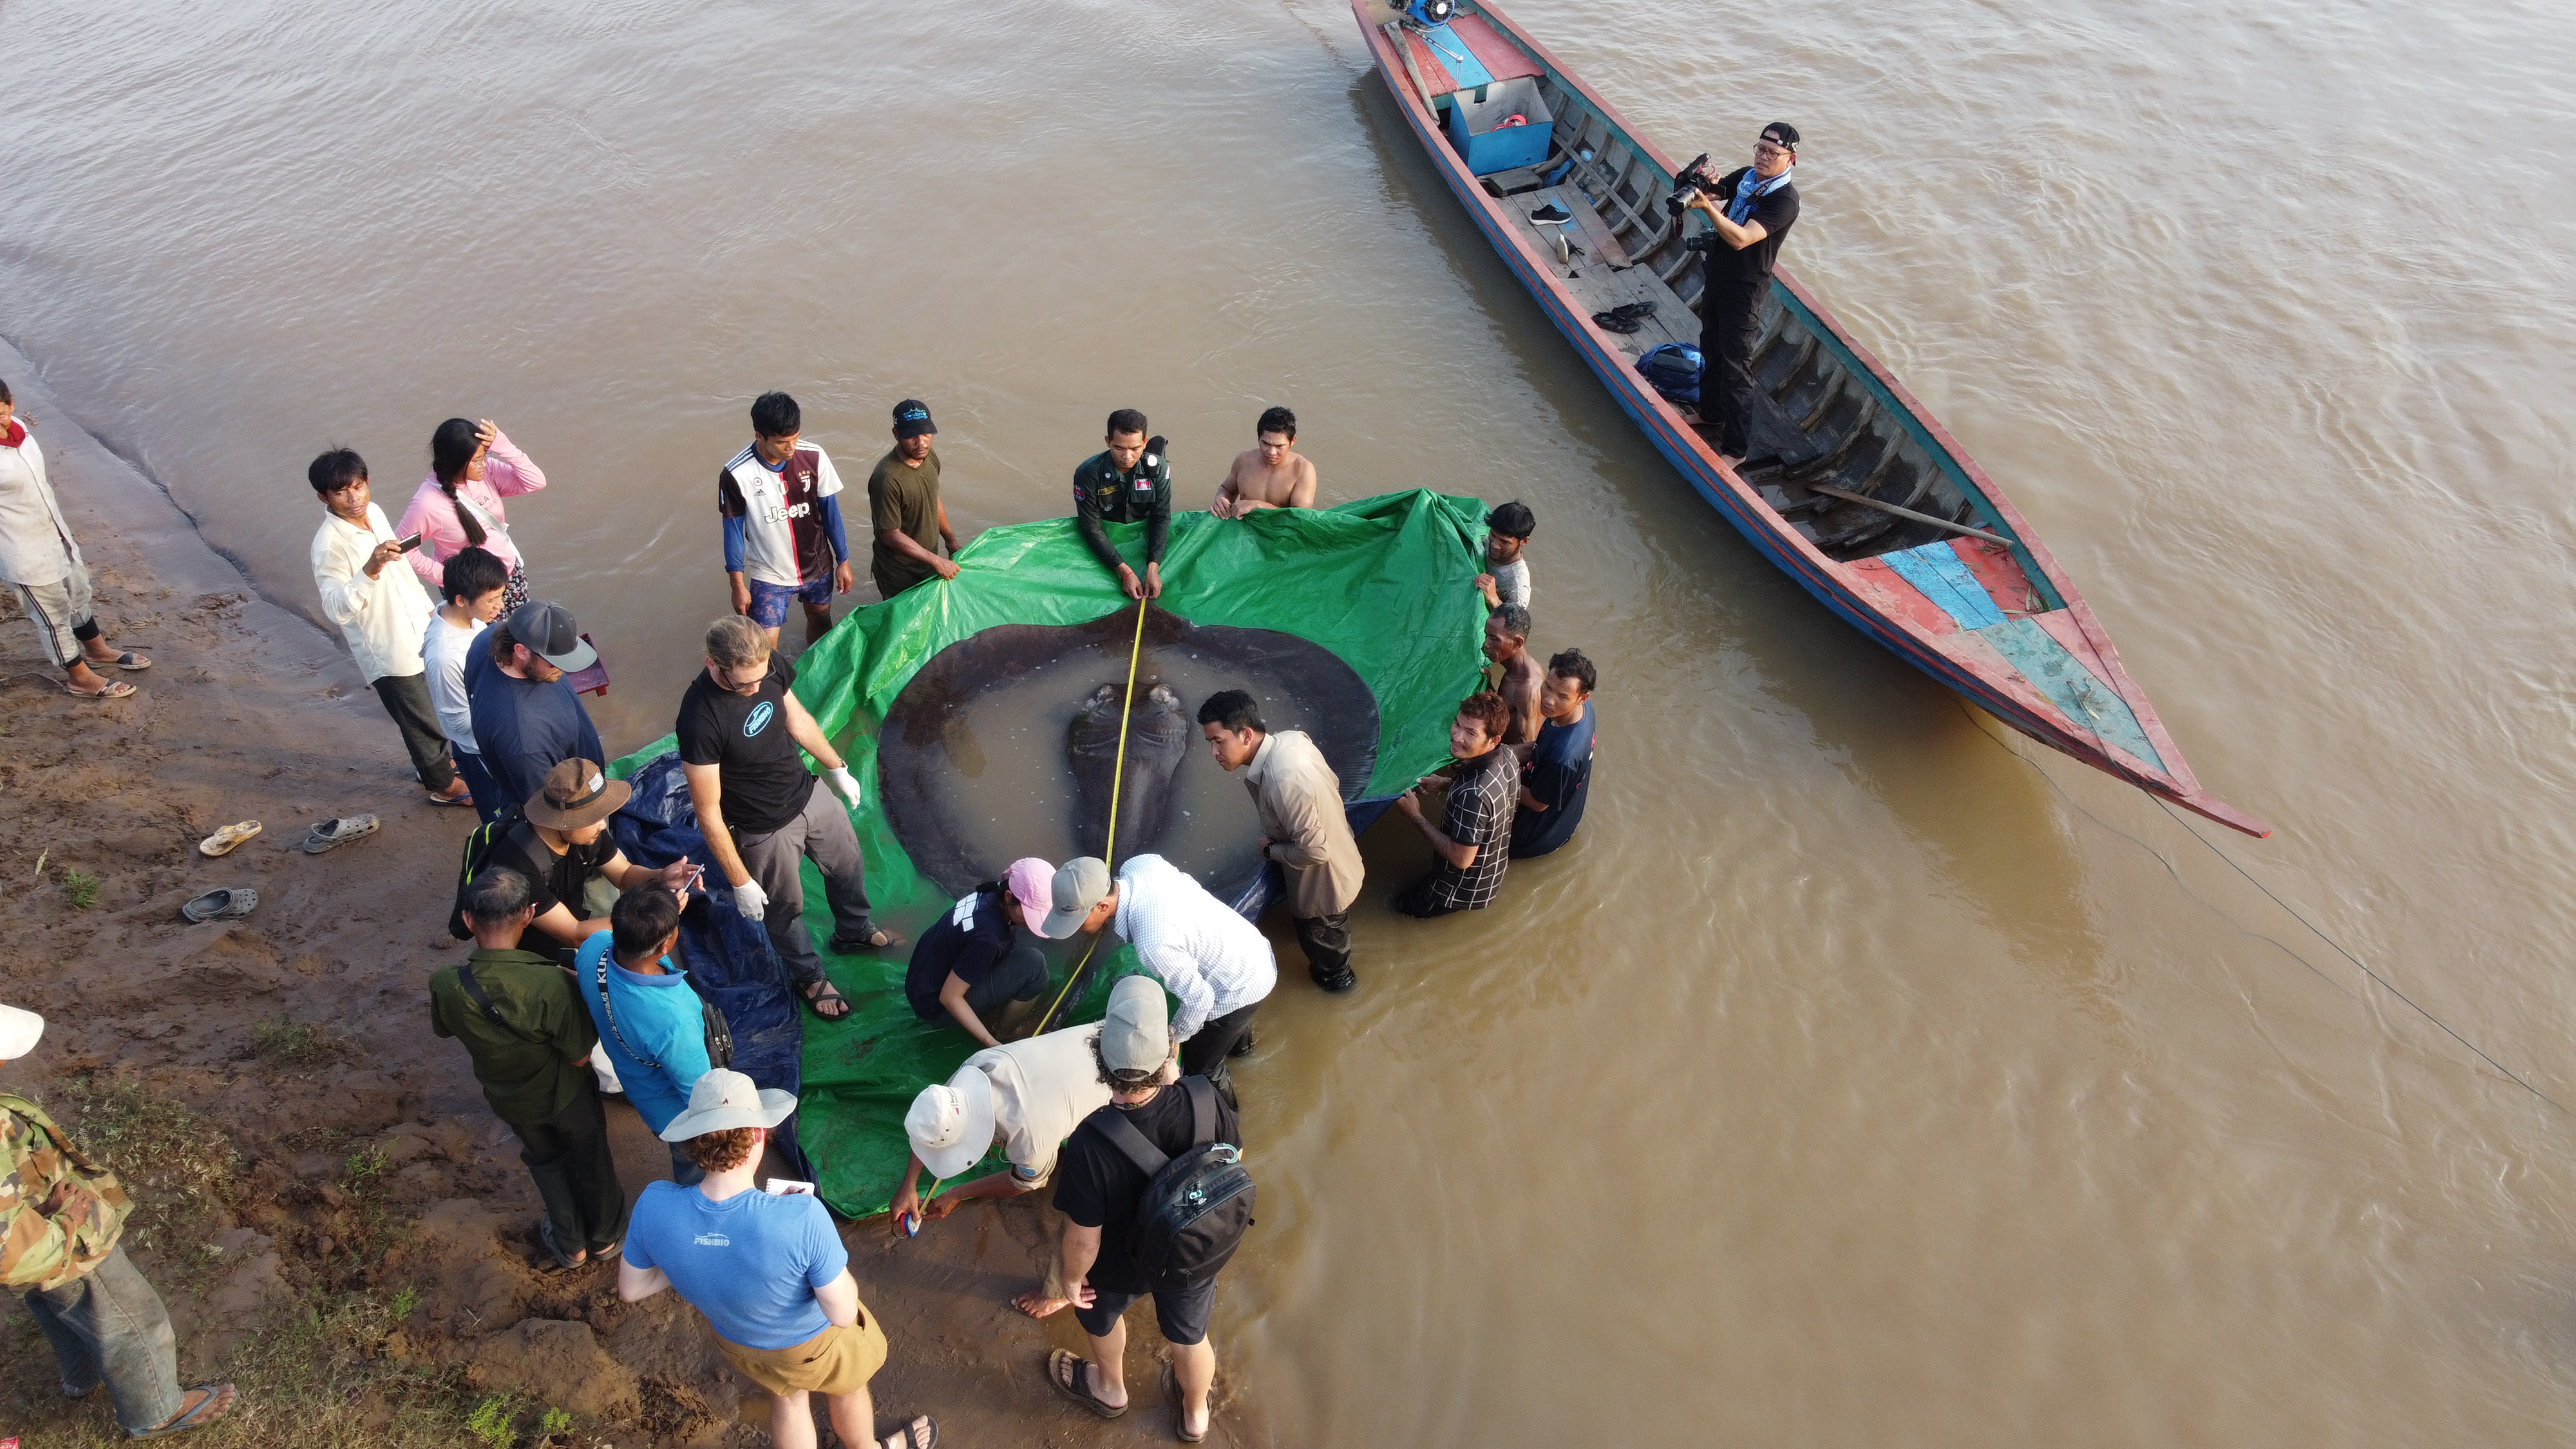 Scientists measure a giant freshwater stingray caught in the Mekong River on June 13, 2022. The catch turned out to be the largest freshwater fish ever recorded.